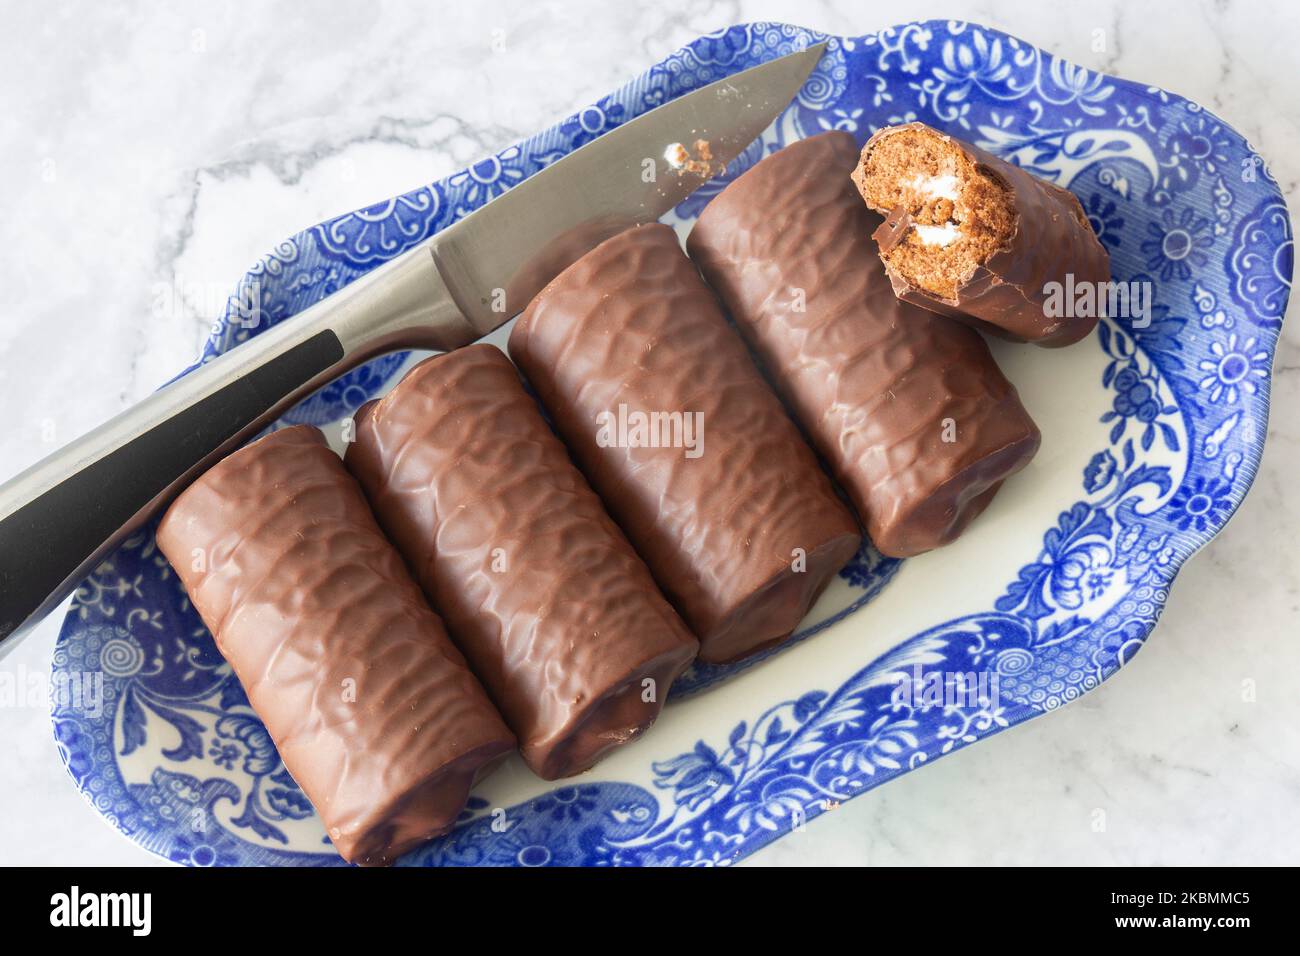 Individual chocolate sponge rolls on a patterned blue and white dish with a serving knife. On a white marble background Stock Photo